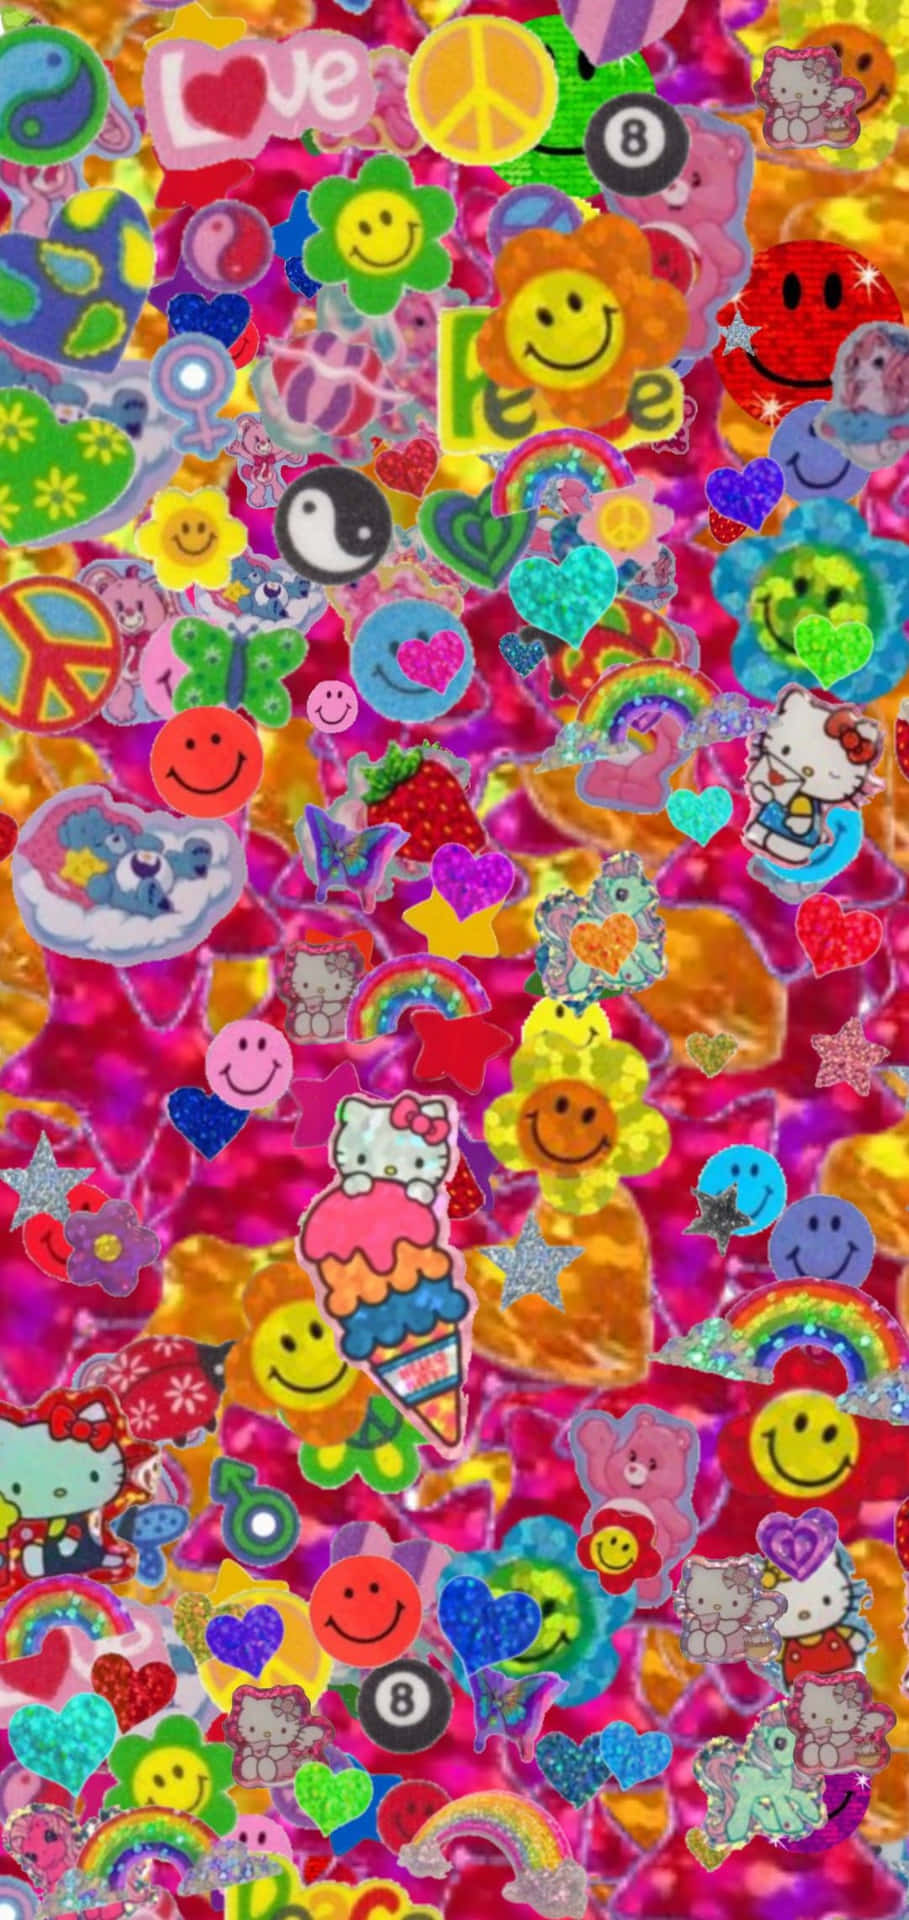 Download A Colorful Collage Of Stickers | Wallpapers.com